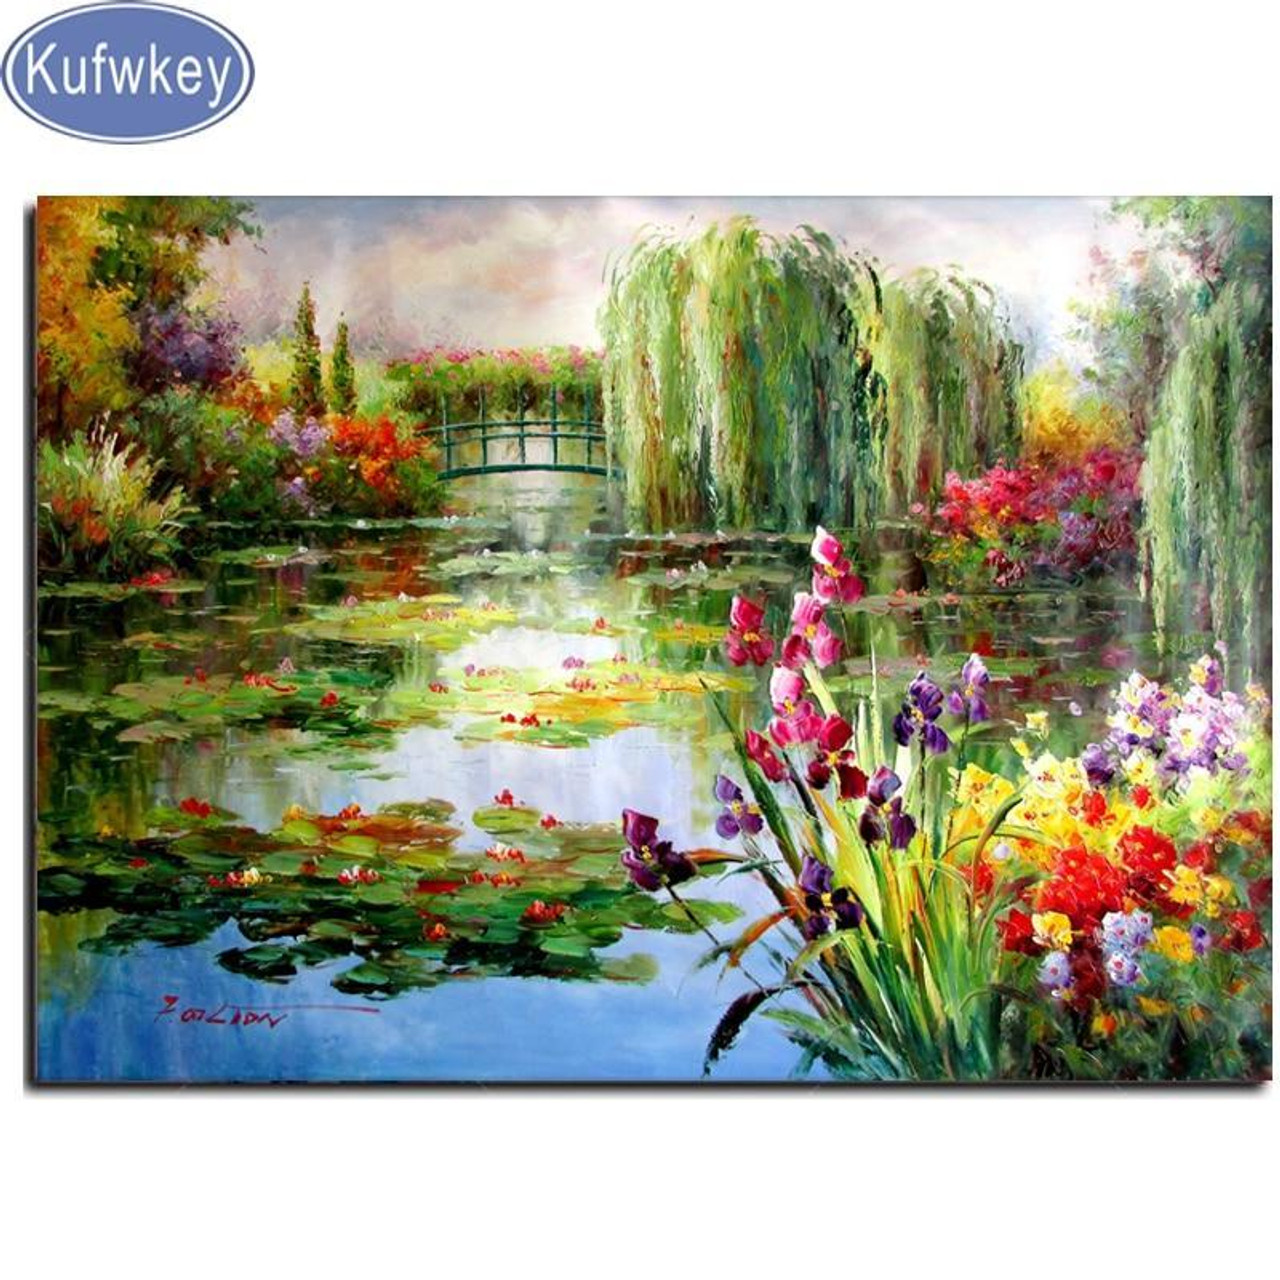 5D Diamond Painting Flowers by the Garden Gate Kit